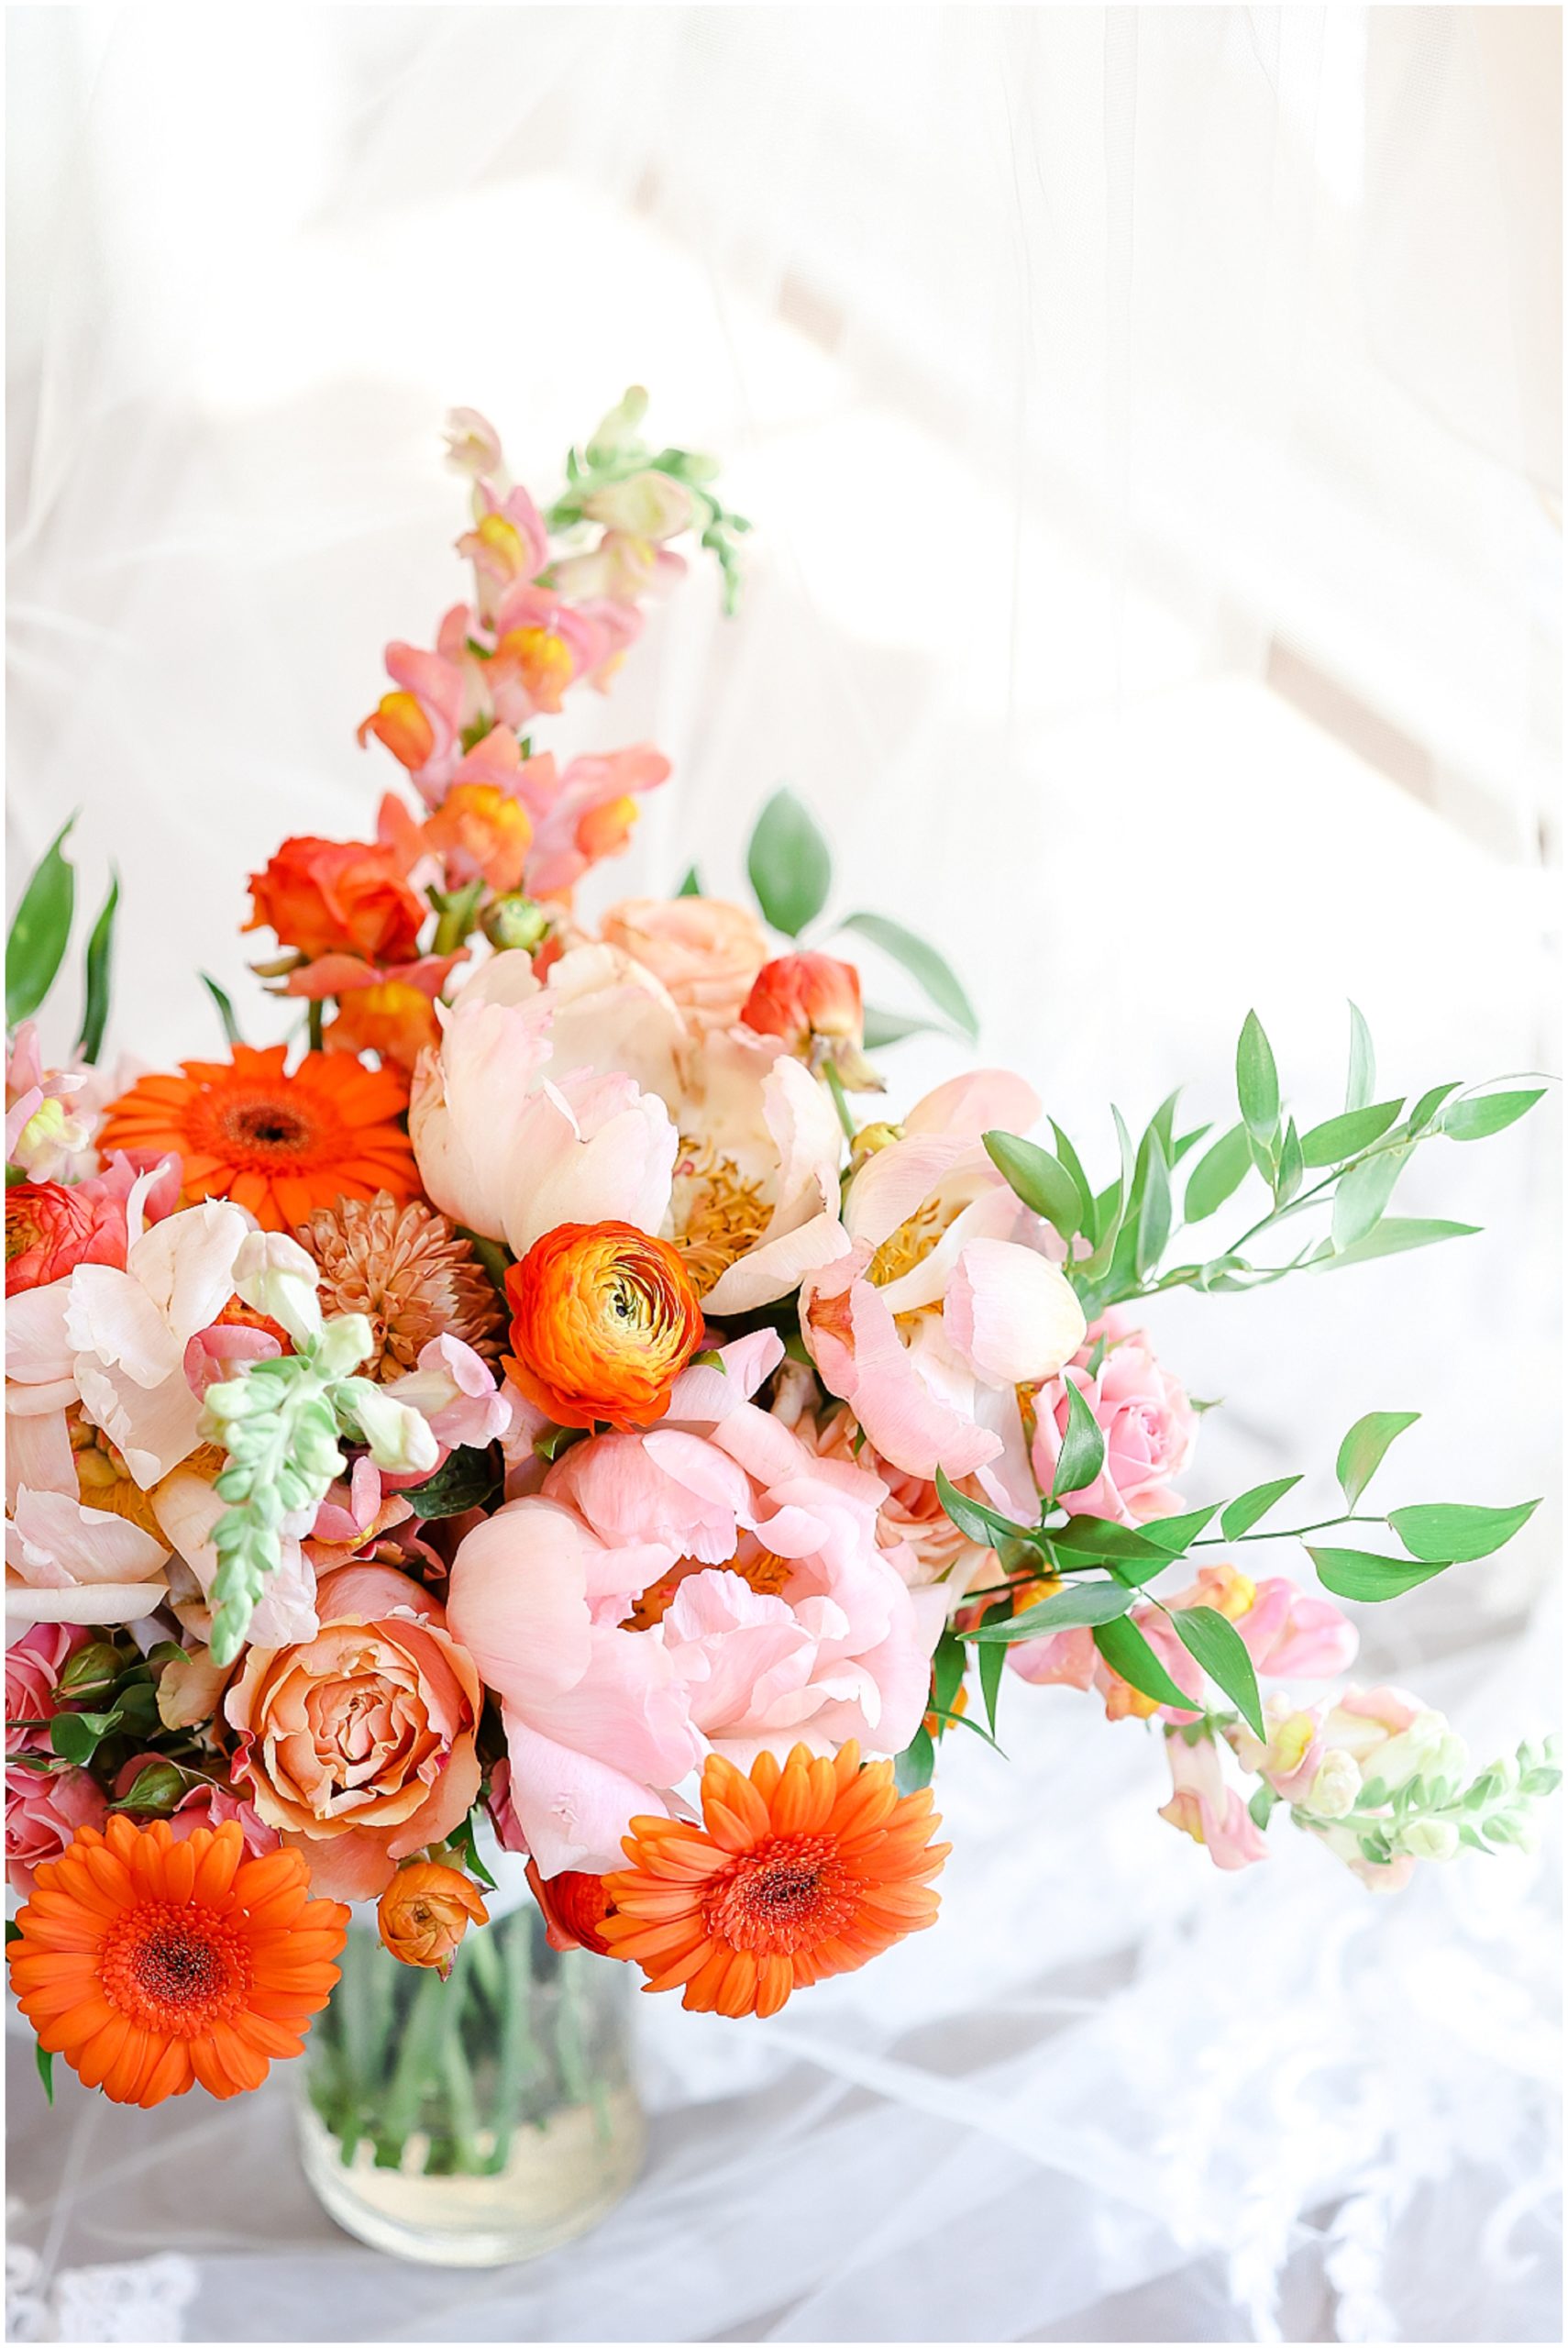 colorful wedding flowers - A Summer Wedding at the Topeka Brownstone Kansas - Wedding Photography in Kansas City - Engagement Photos - Colorful Wedding